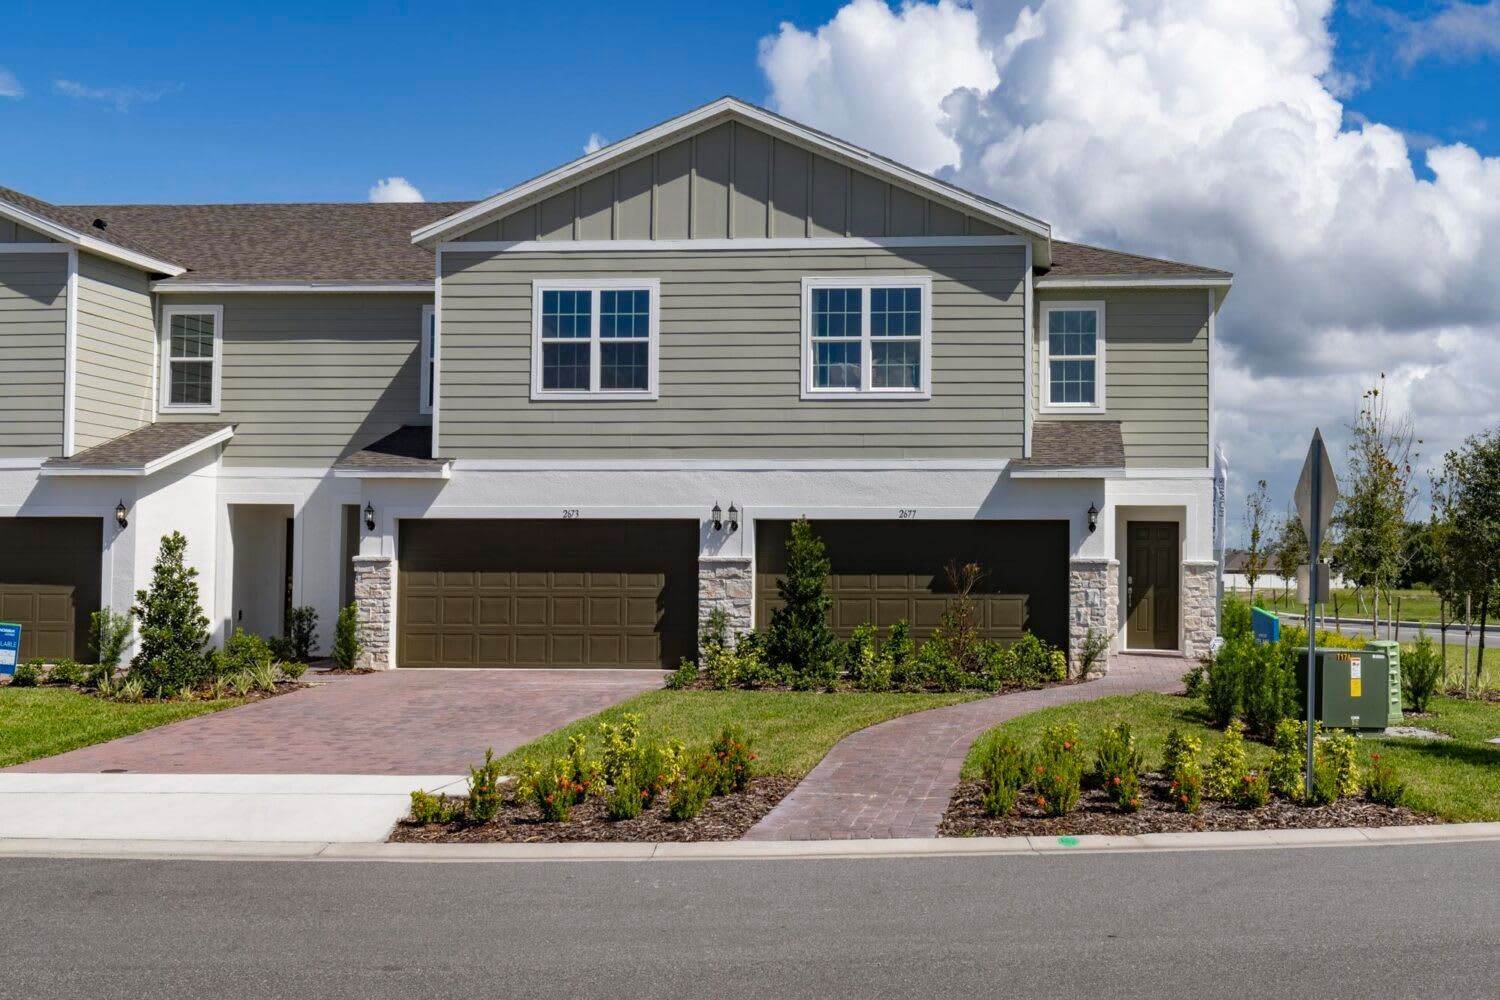 Townhomes at Sky Lakes Estates建於 Michigan Ave (Behind St. Cloud High School), St. Cloud, FL 34769